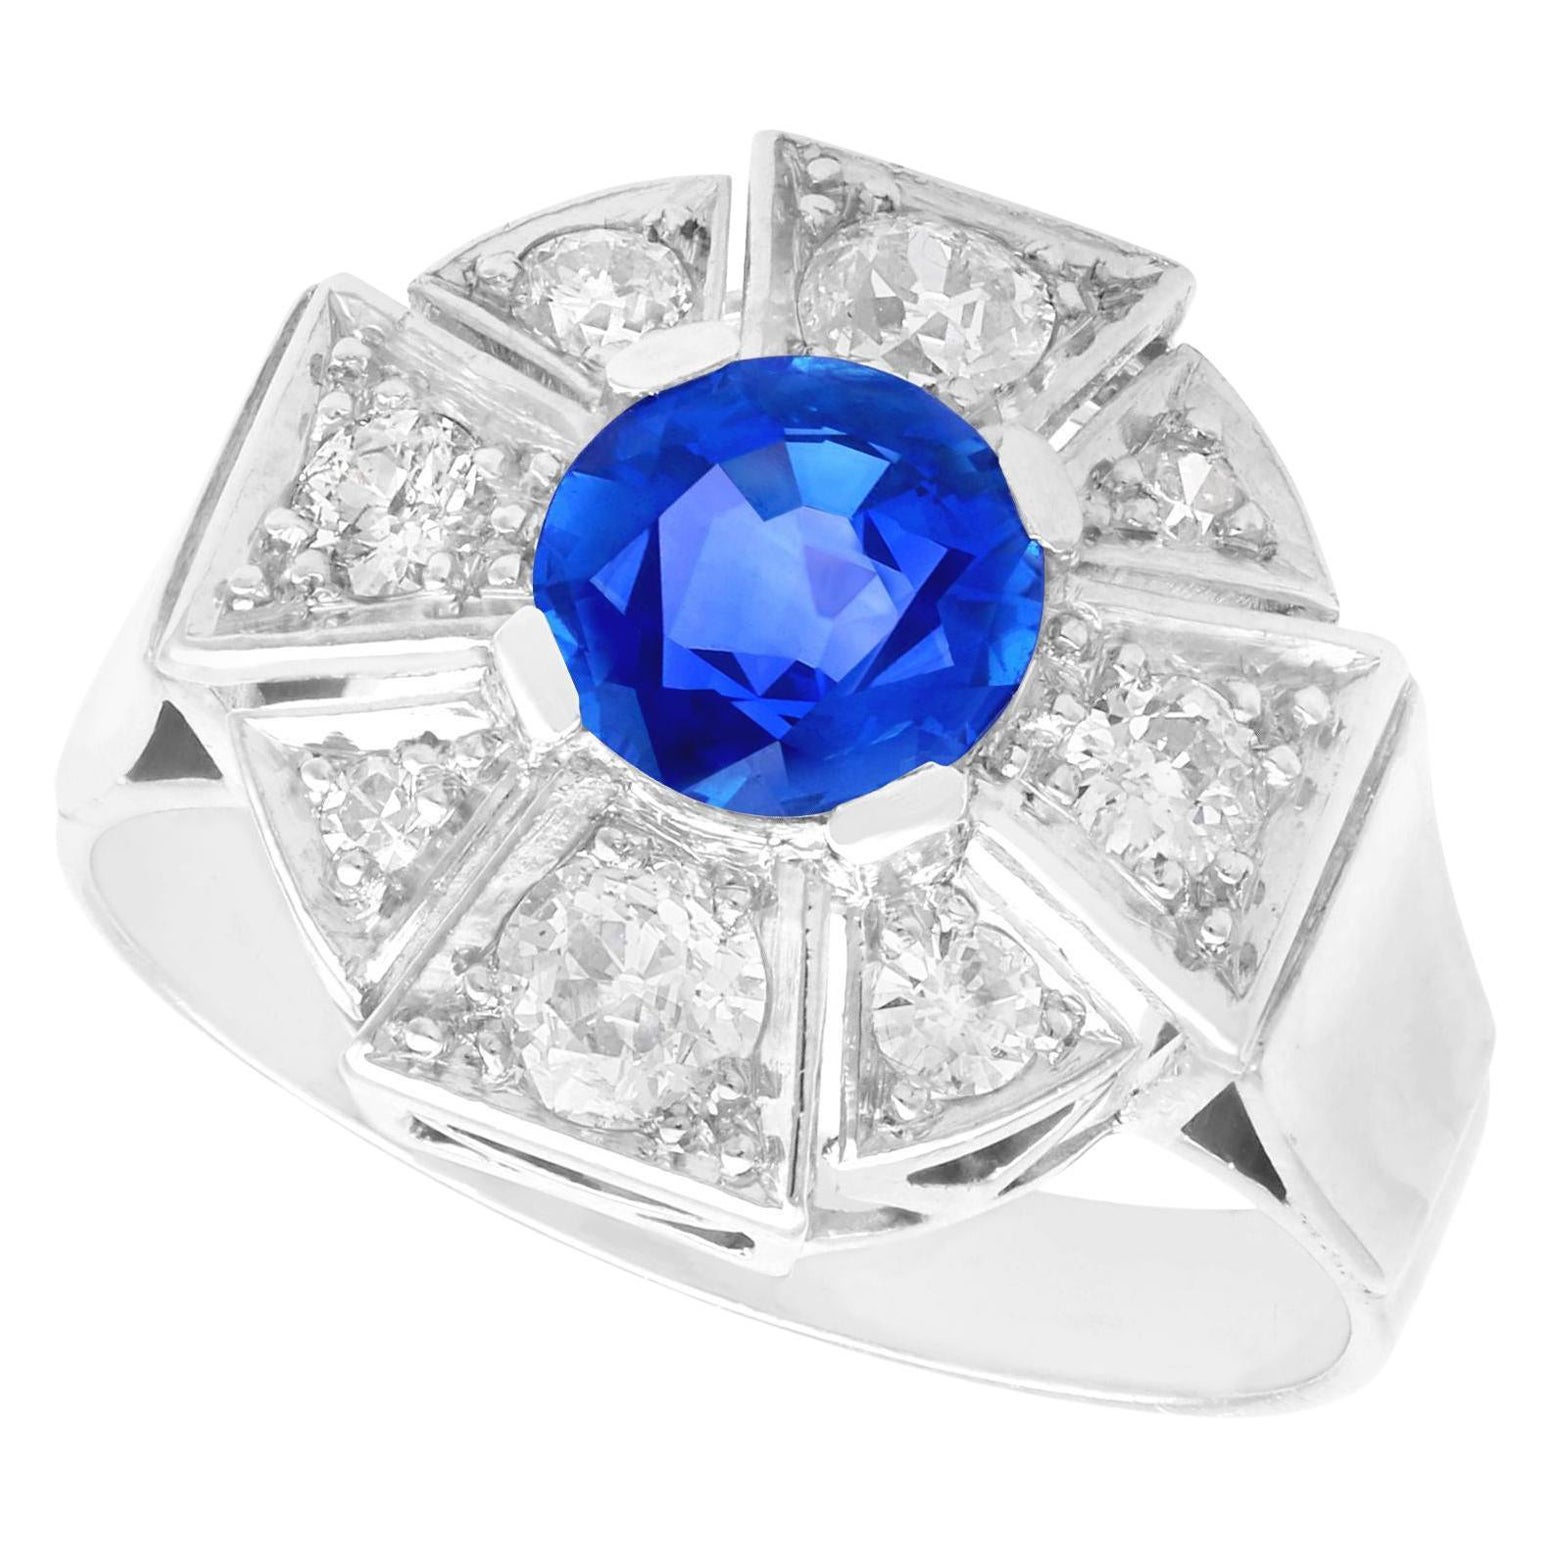 1.69 Carat Burmese Sapphire and 1.15 Carat Diamond White Gold Cocktail Ring For Sale